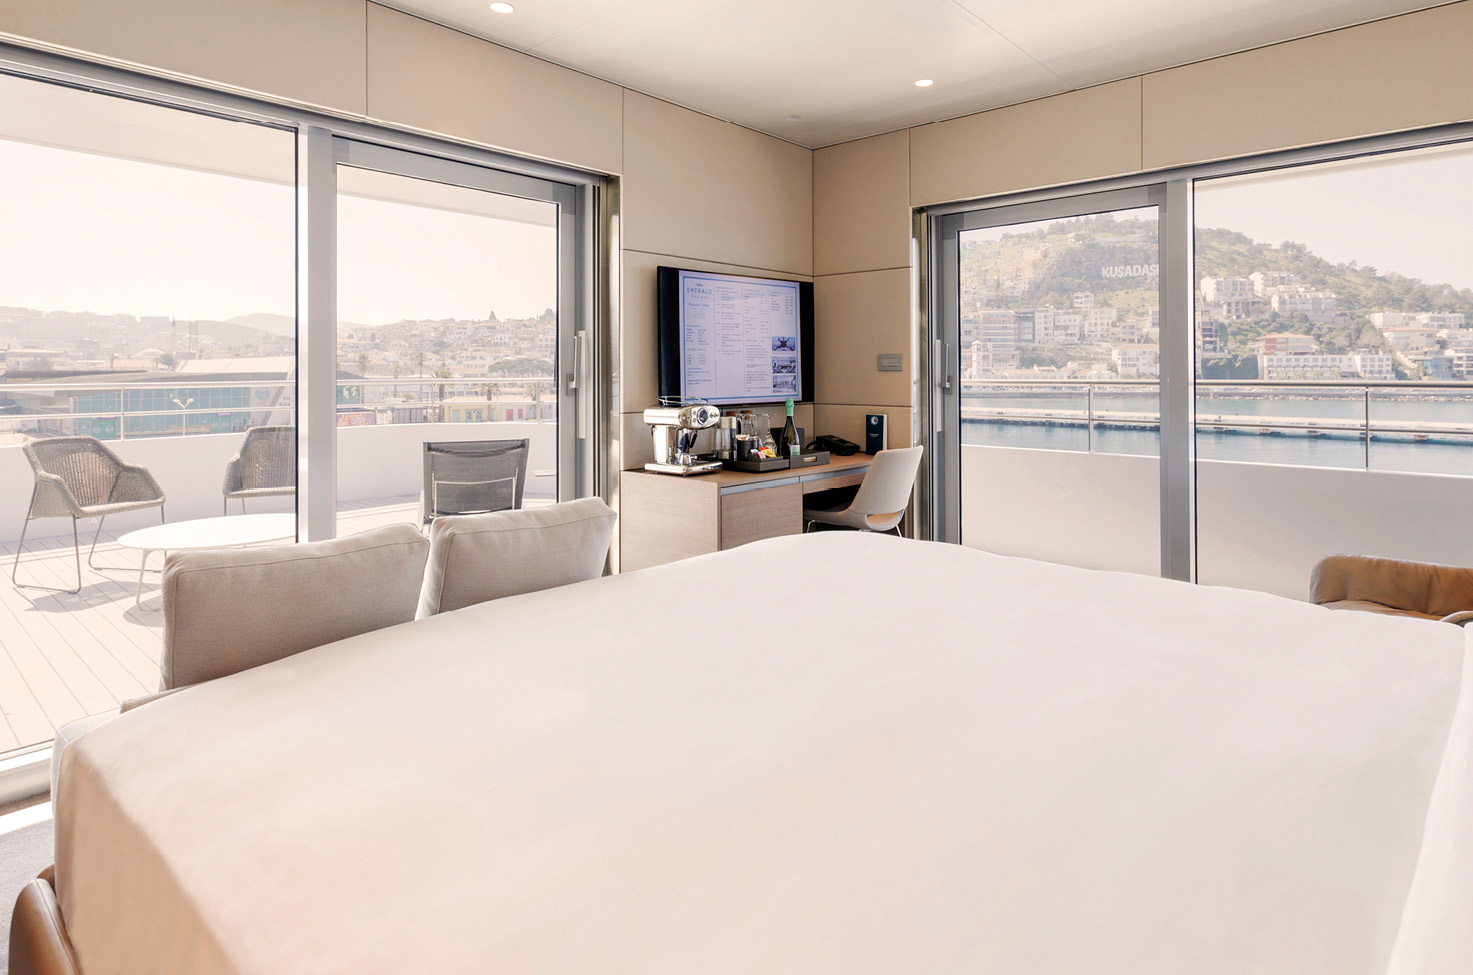 Suite on board a luxury yacht with double bed and balcony doors shown.